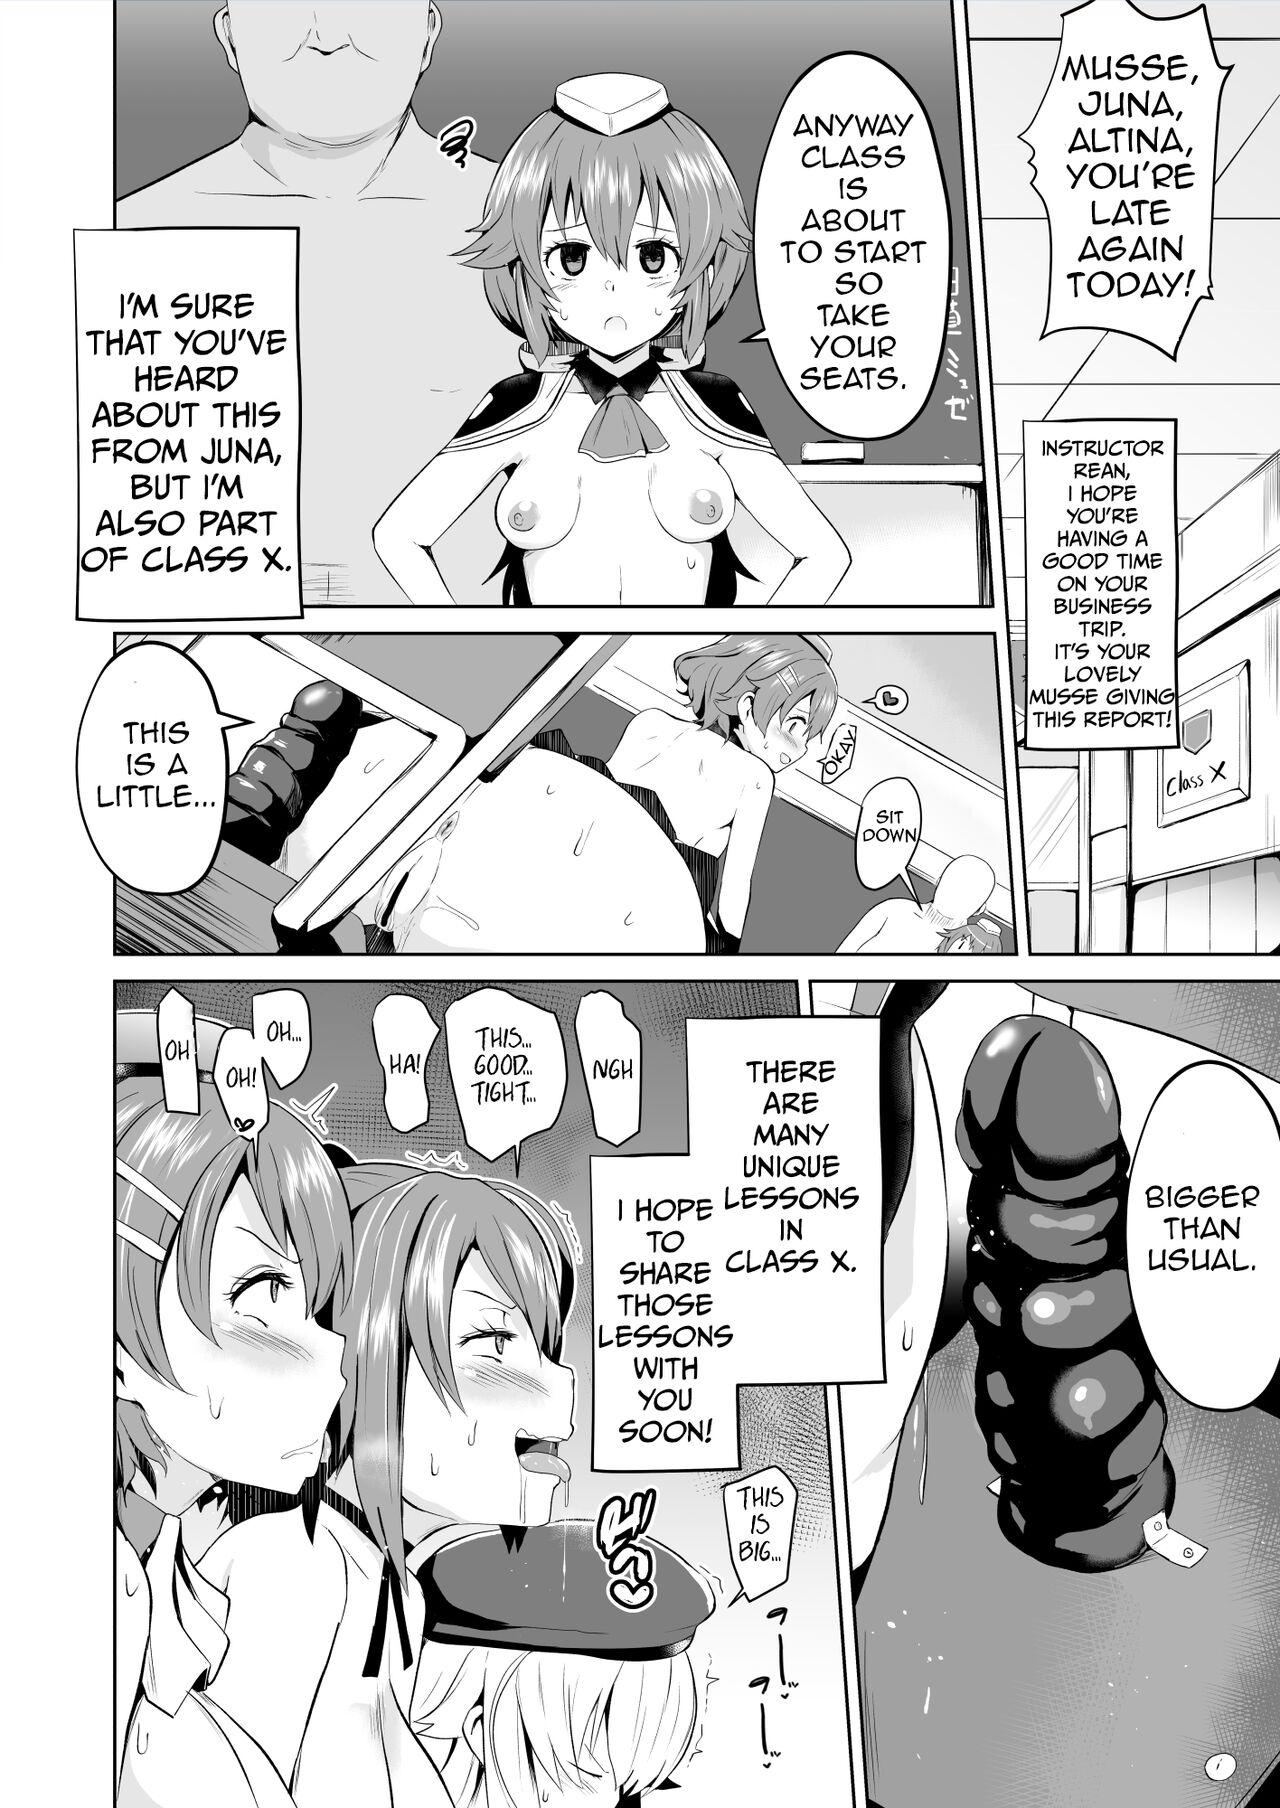 Exhibition Hypnosis of the New Class VII - The legend of heroes | eiyuu densetsu Hot Whores - Page 9